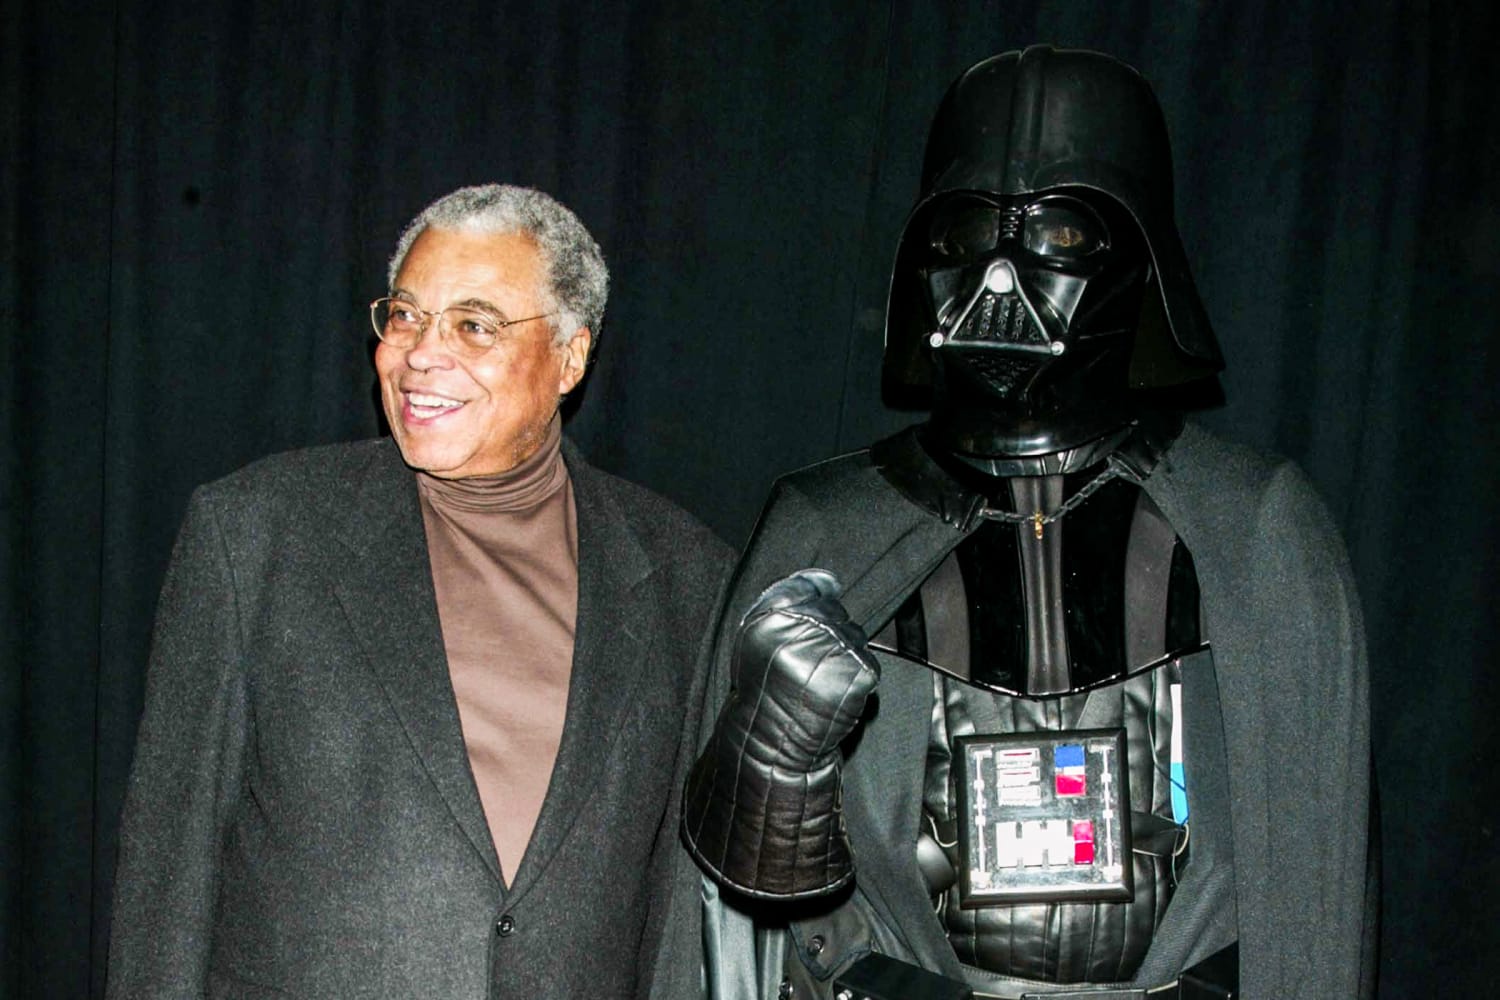 James Earl Jones approves using his archived recordings to recreate Darth Vader's voice with A.I.